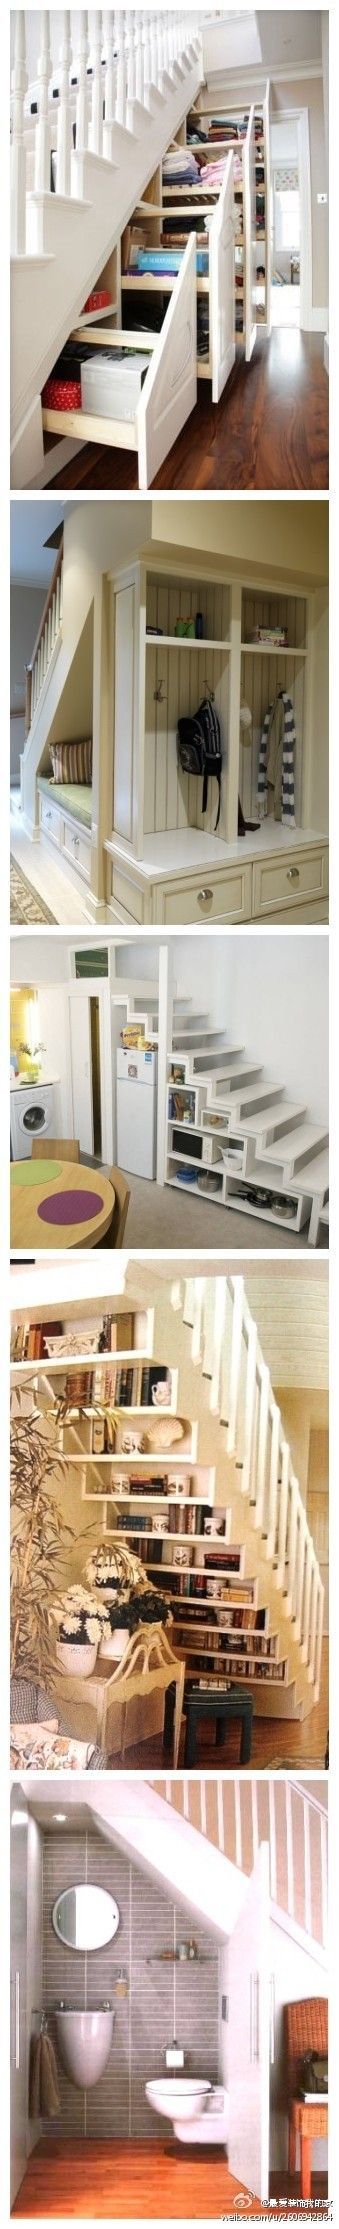 "If I had a house with stairs…this would be useful. Good ideas though.&qu